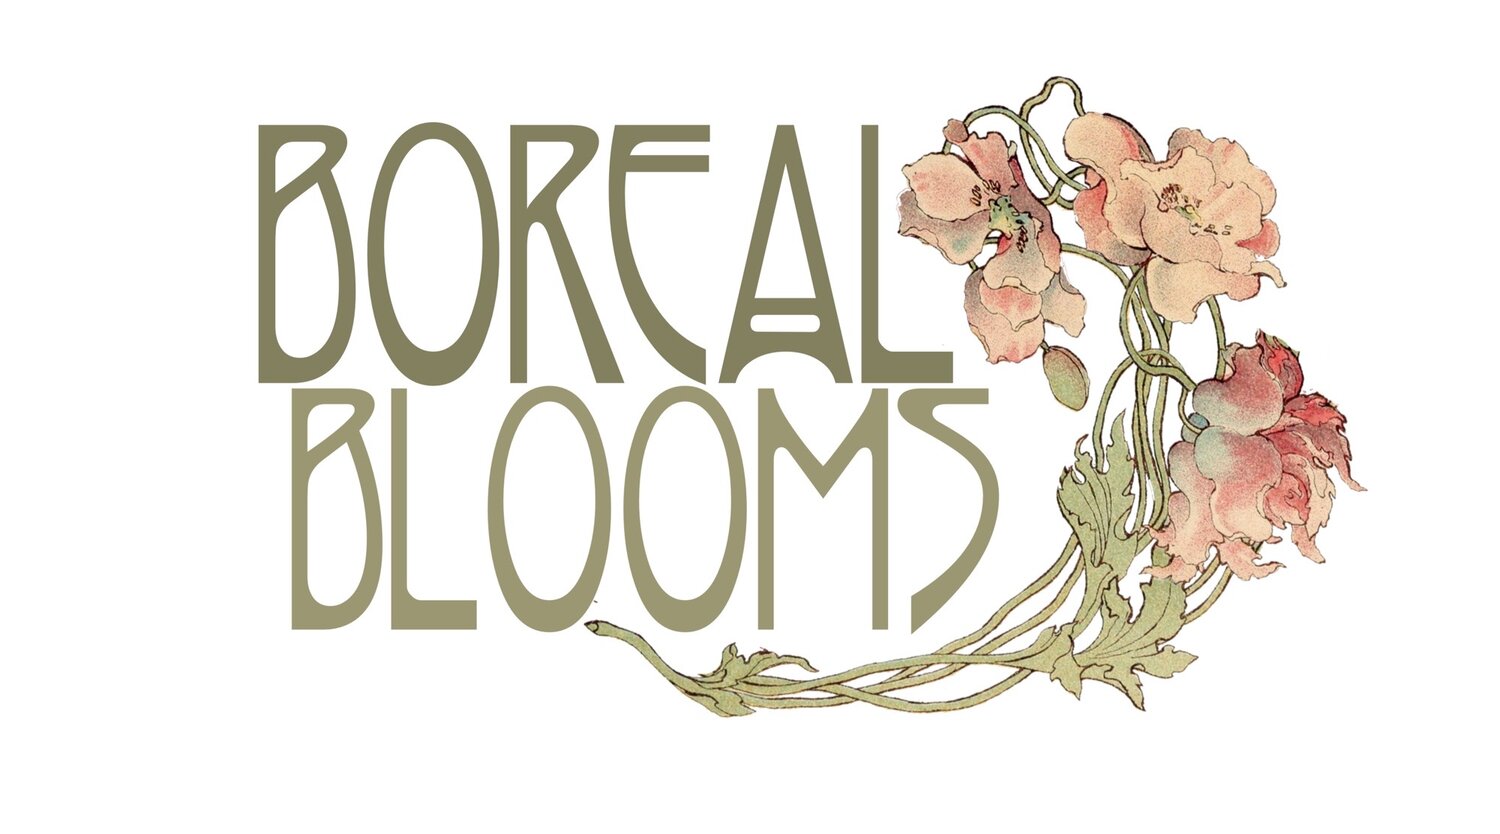 BOREAL BLOOMS